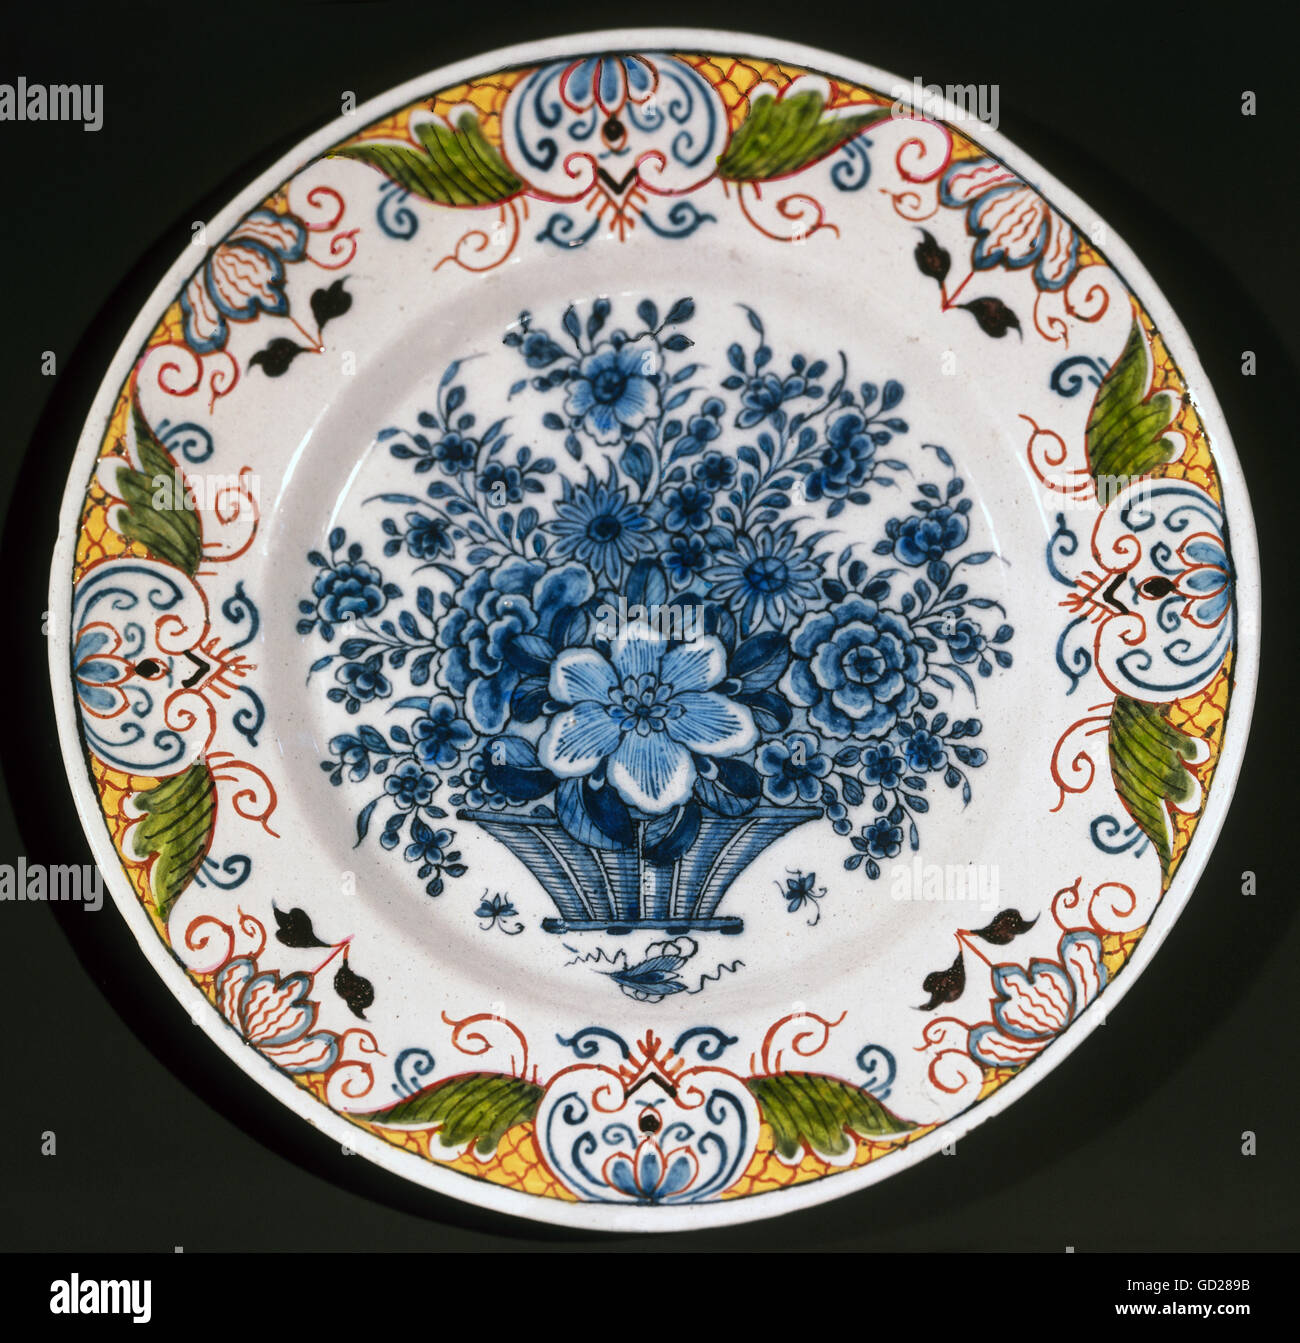 fine arts, faience, plate with flower basket in the centre and flower ornament on the edge, diameter 23 cm, Delft, 18th century, De Porceleyne Fles, Delft, Artist's Copyright has not to be cleared Stock Photo